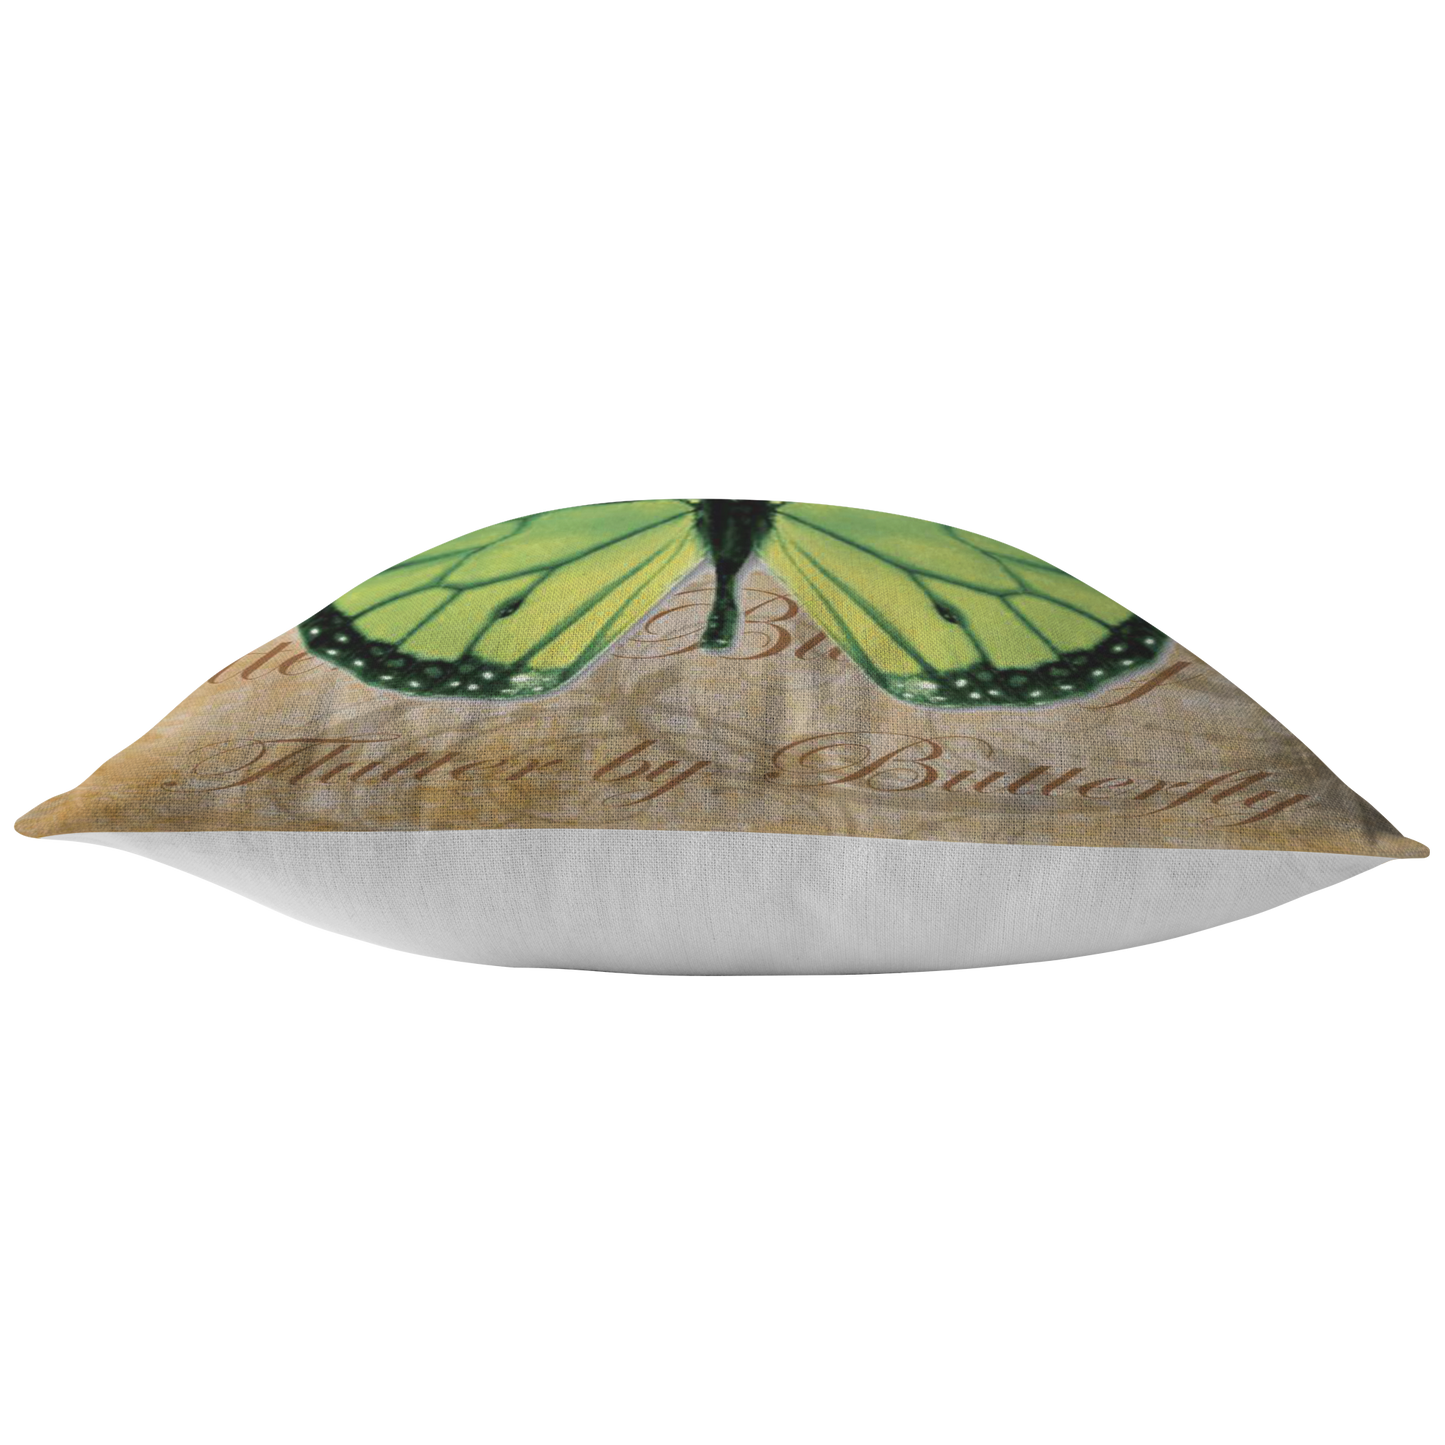 Green Butterfly Nature Digital Collage Throw Pillow